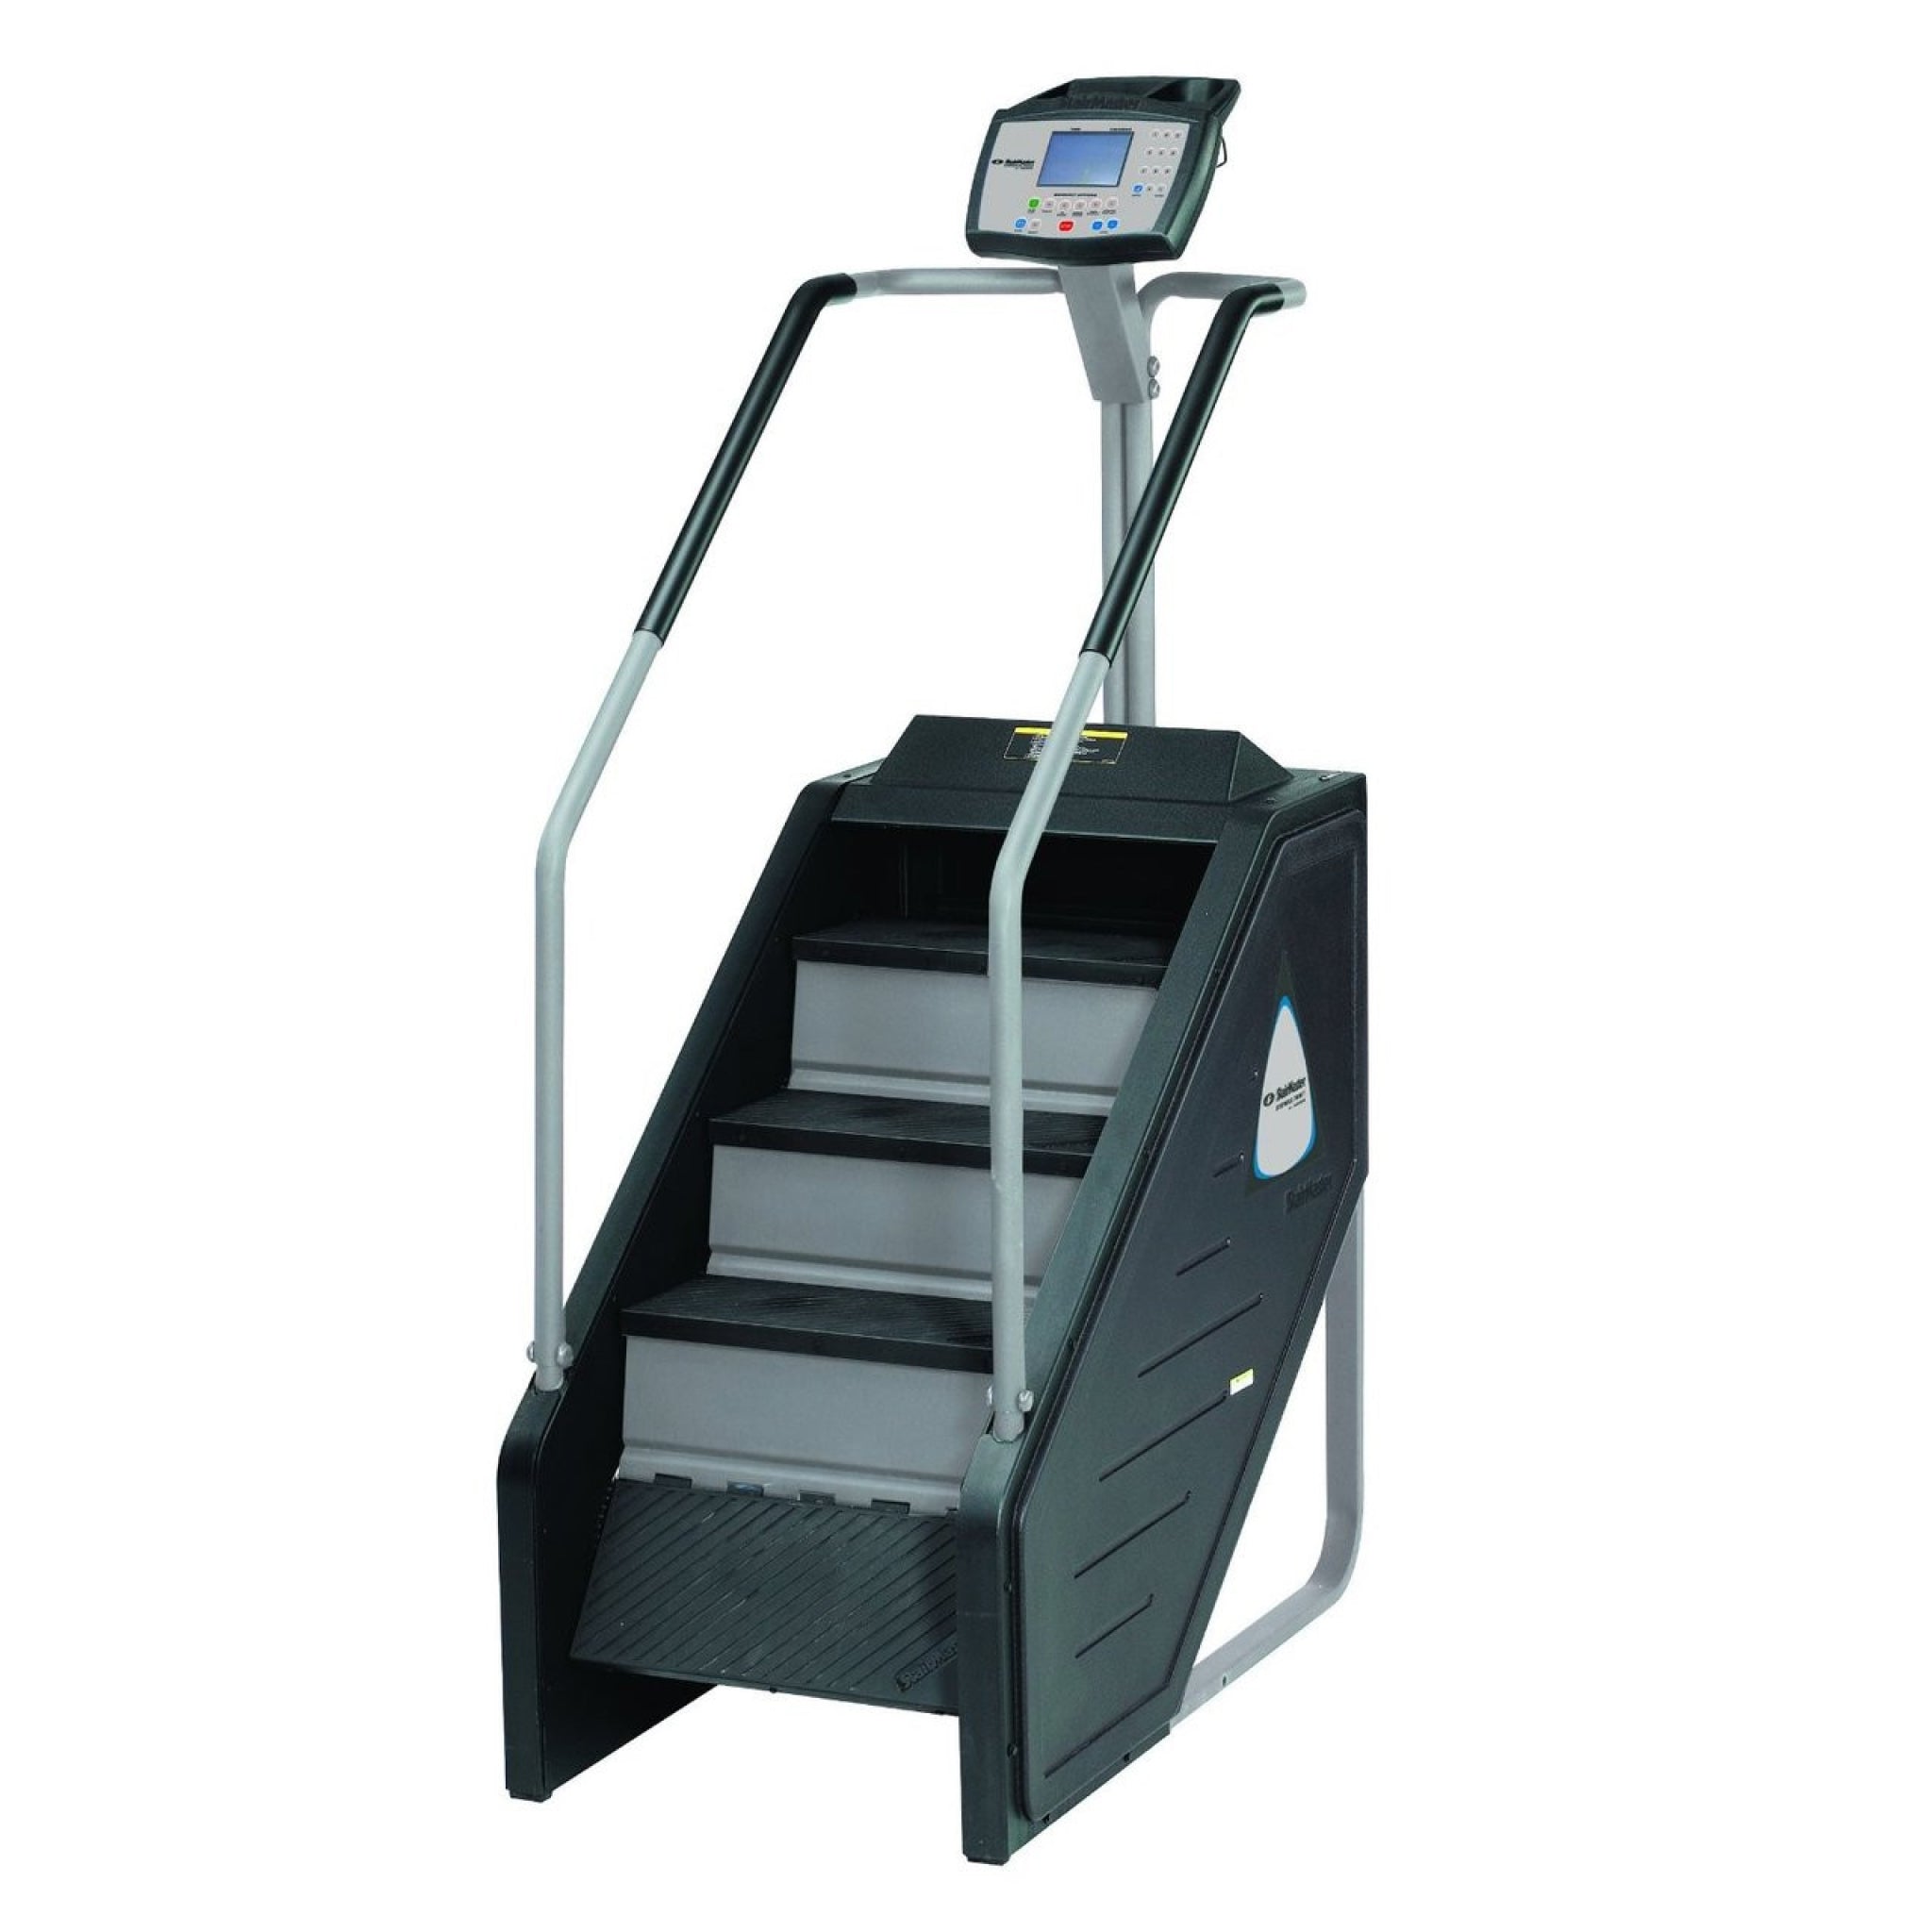 The StairMaster 7000PT Stepmill